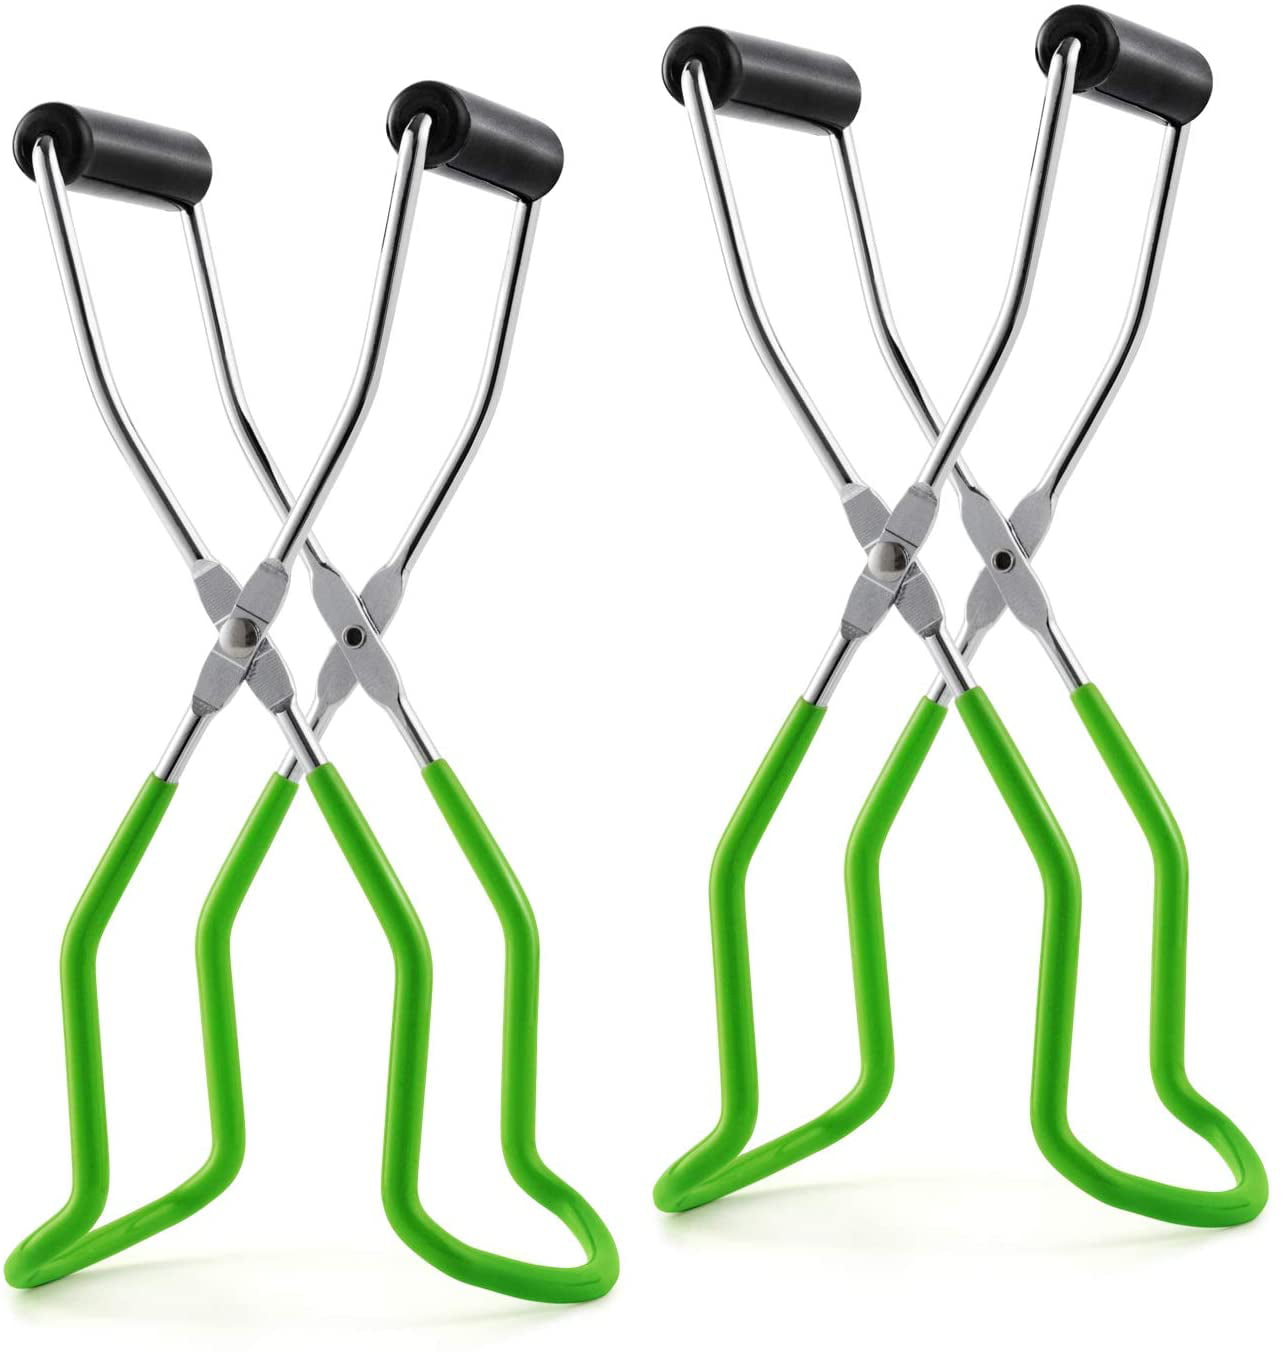 Green 1PC Stainless Steel Jar Lifter Canning Jar Lifter Tongs with Grip Handle for Safe and Secure Grip 